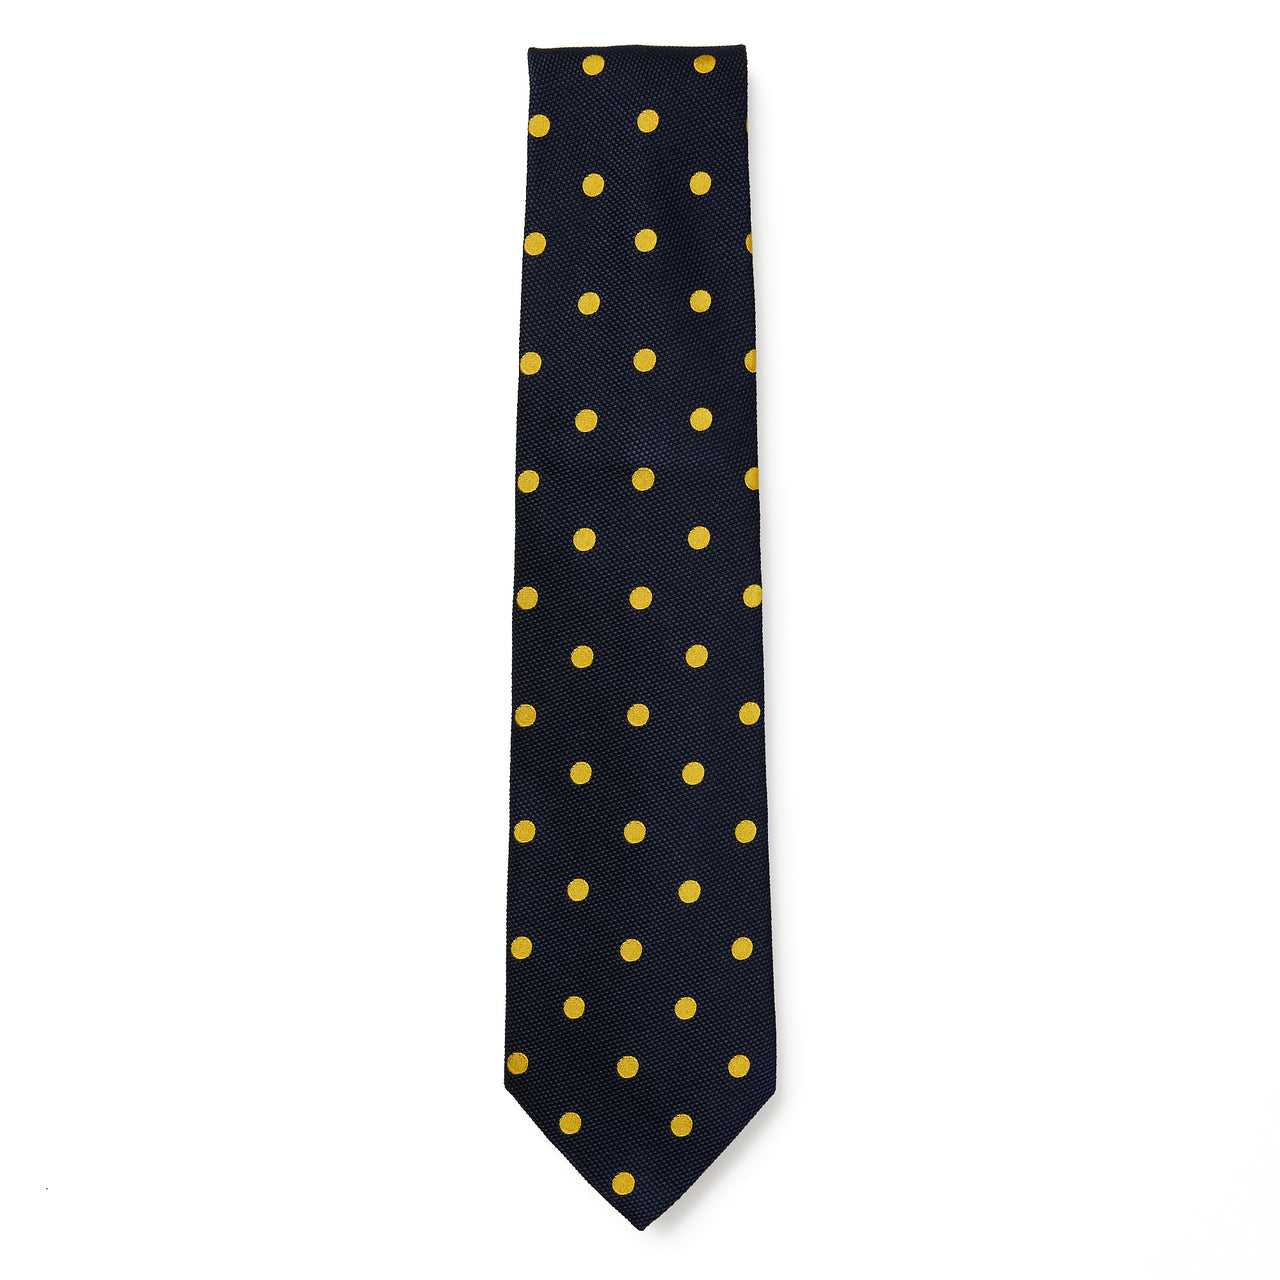 HENRY SARTORIAL 3 Fold Zeus Collection Tie NAVY/GOLD